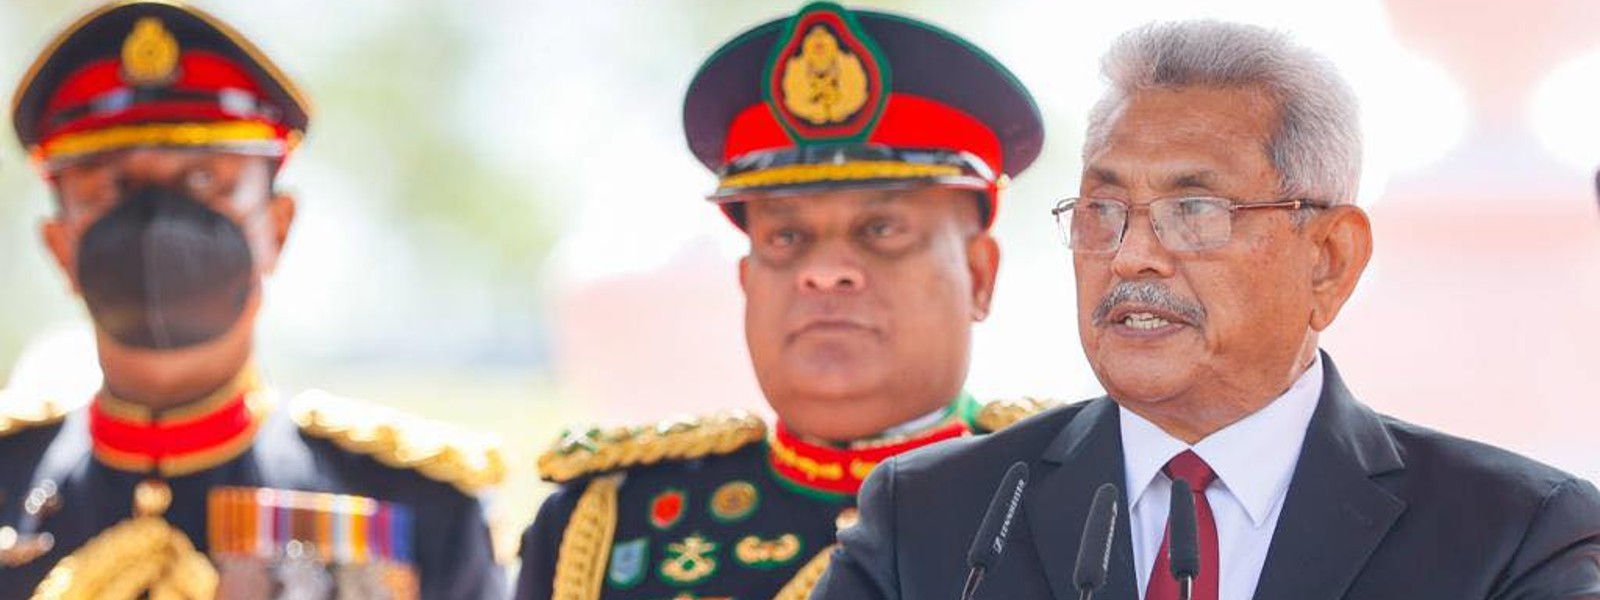 Setbacks are part of the journey, says President